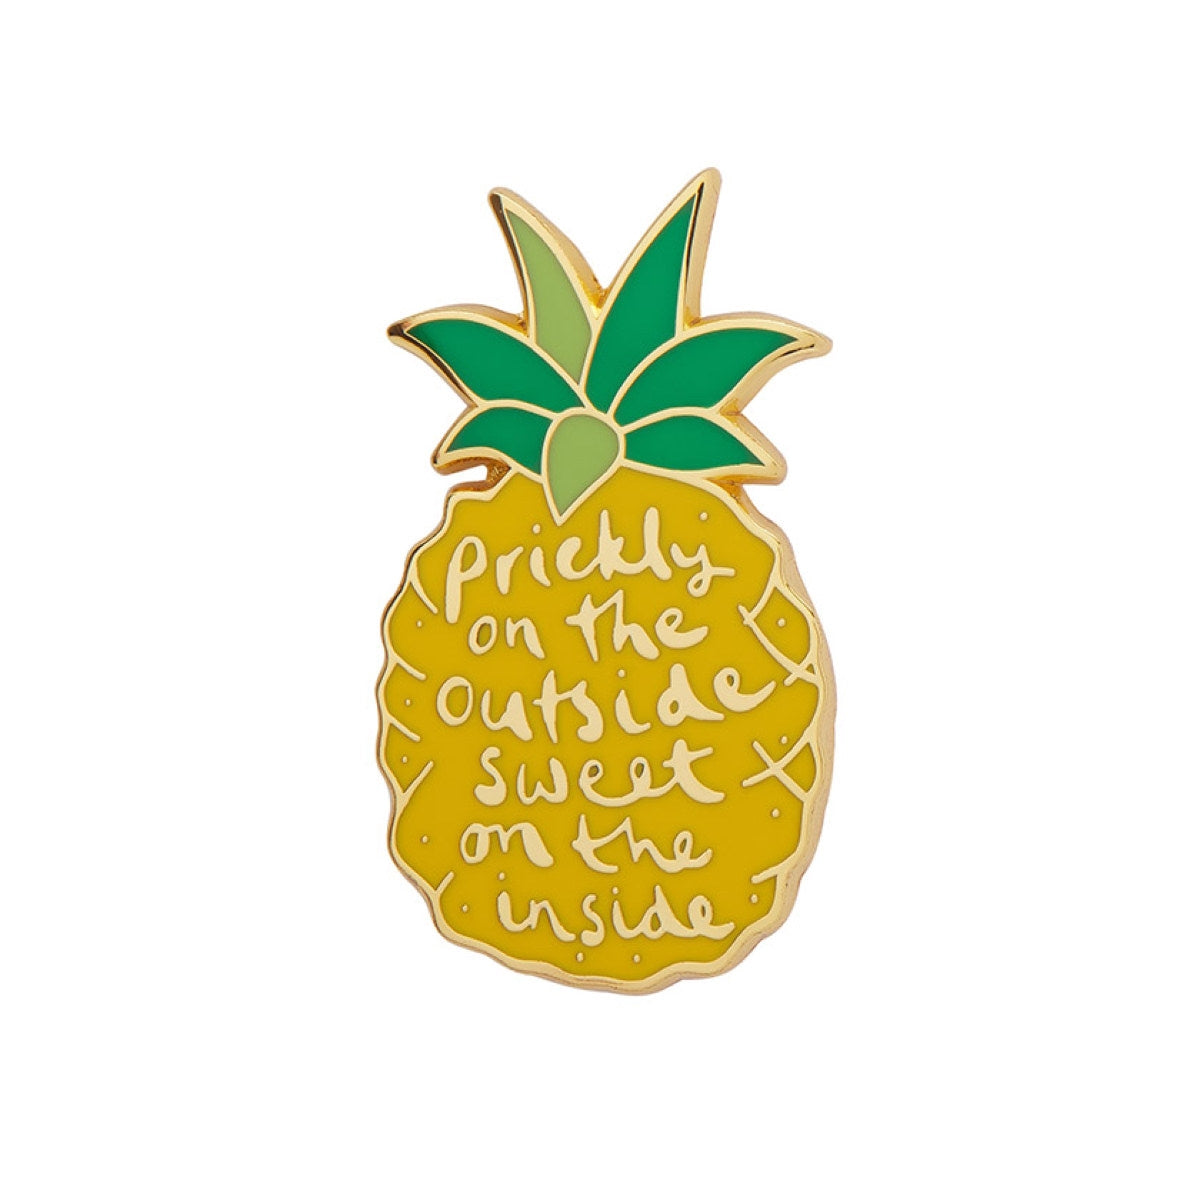 5/8" x 1 1/8" pineapple shaped "prickly on the outside sweet on the inside" yellow green enameled gold metal clutch back pin